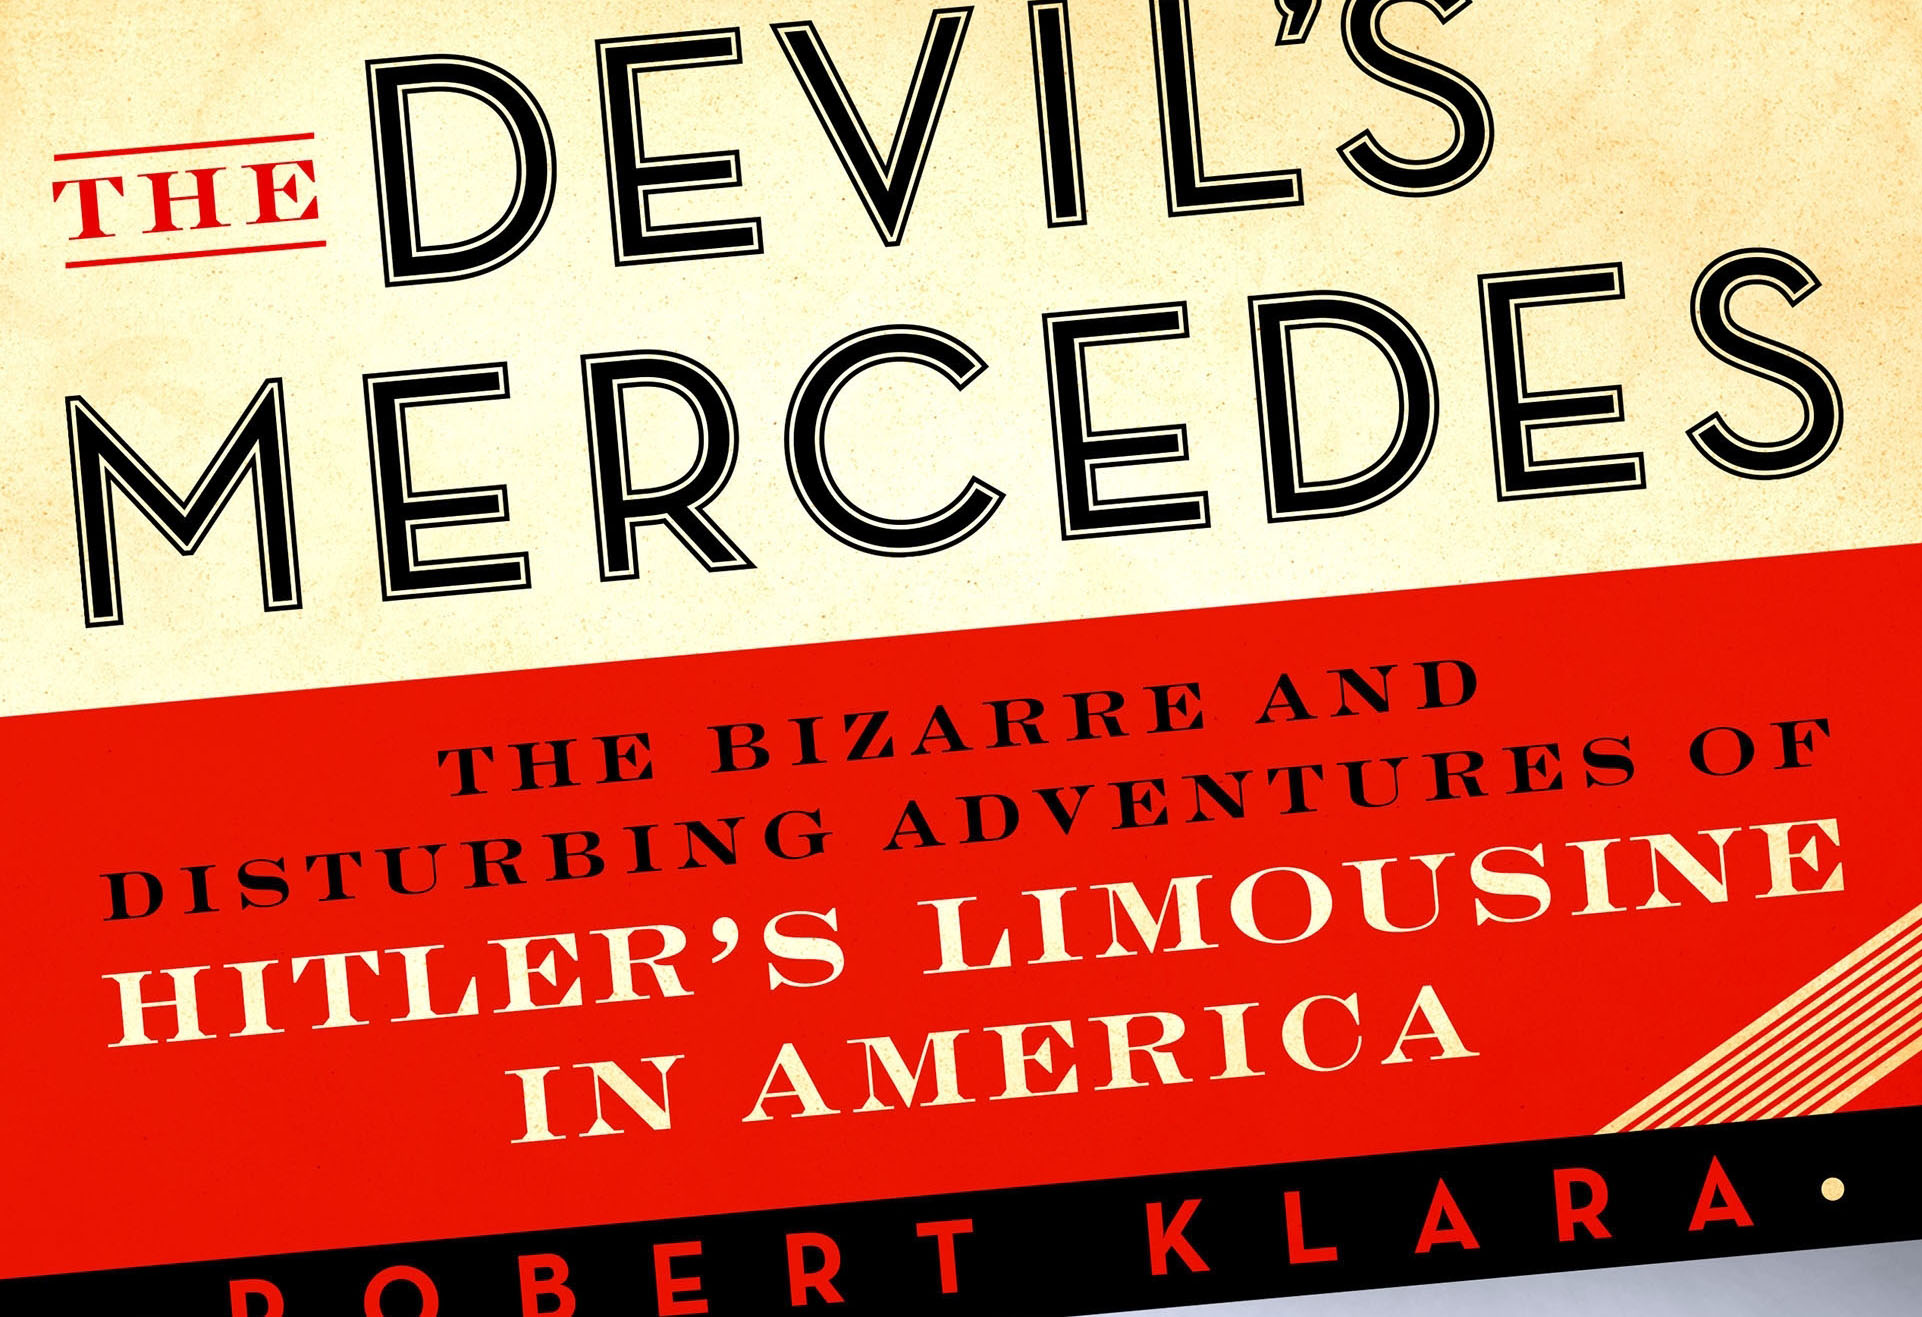 An excerpt from ‘The Devil’s Mercedes: The Bizarre and Disturbing Adventures of Hitler’s Limousine in America”